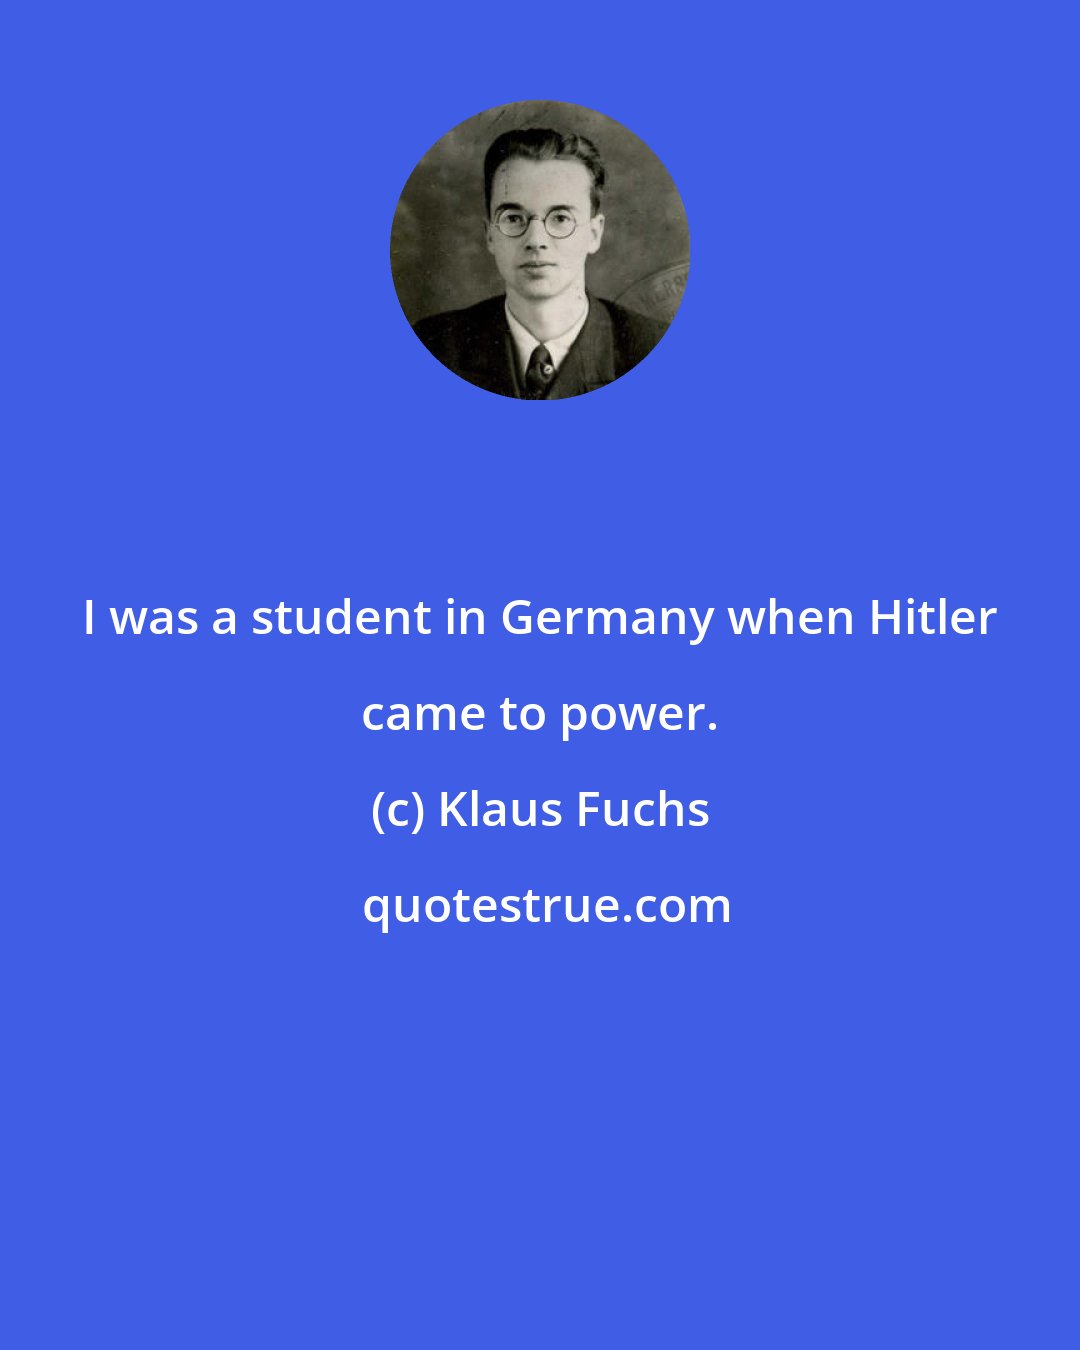 Klaus Fuchs: I was a student in Germany when Hitler came to power.